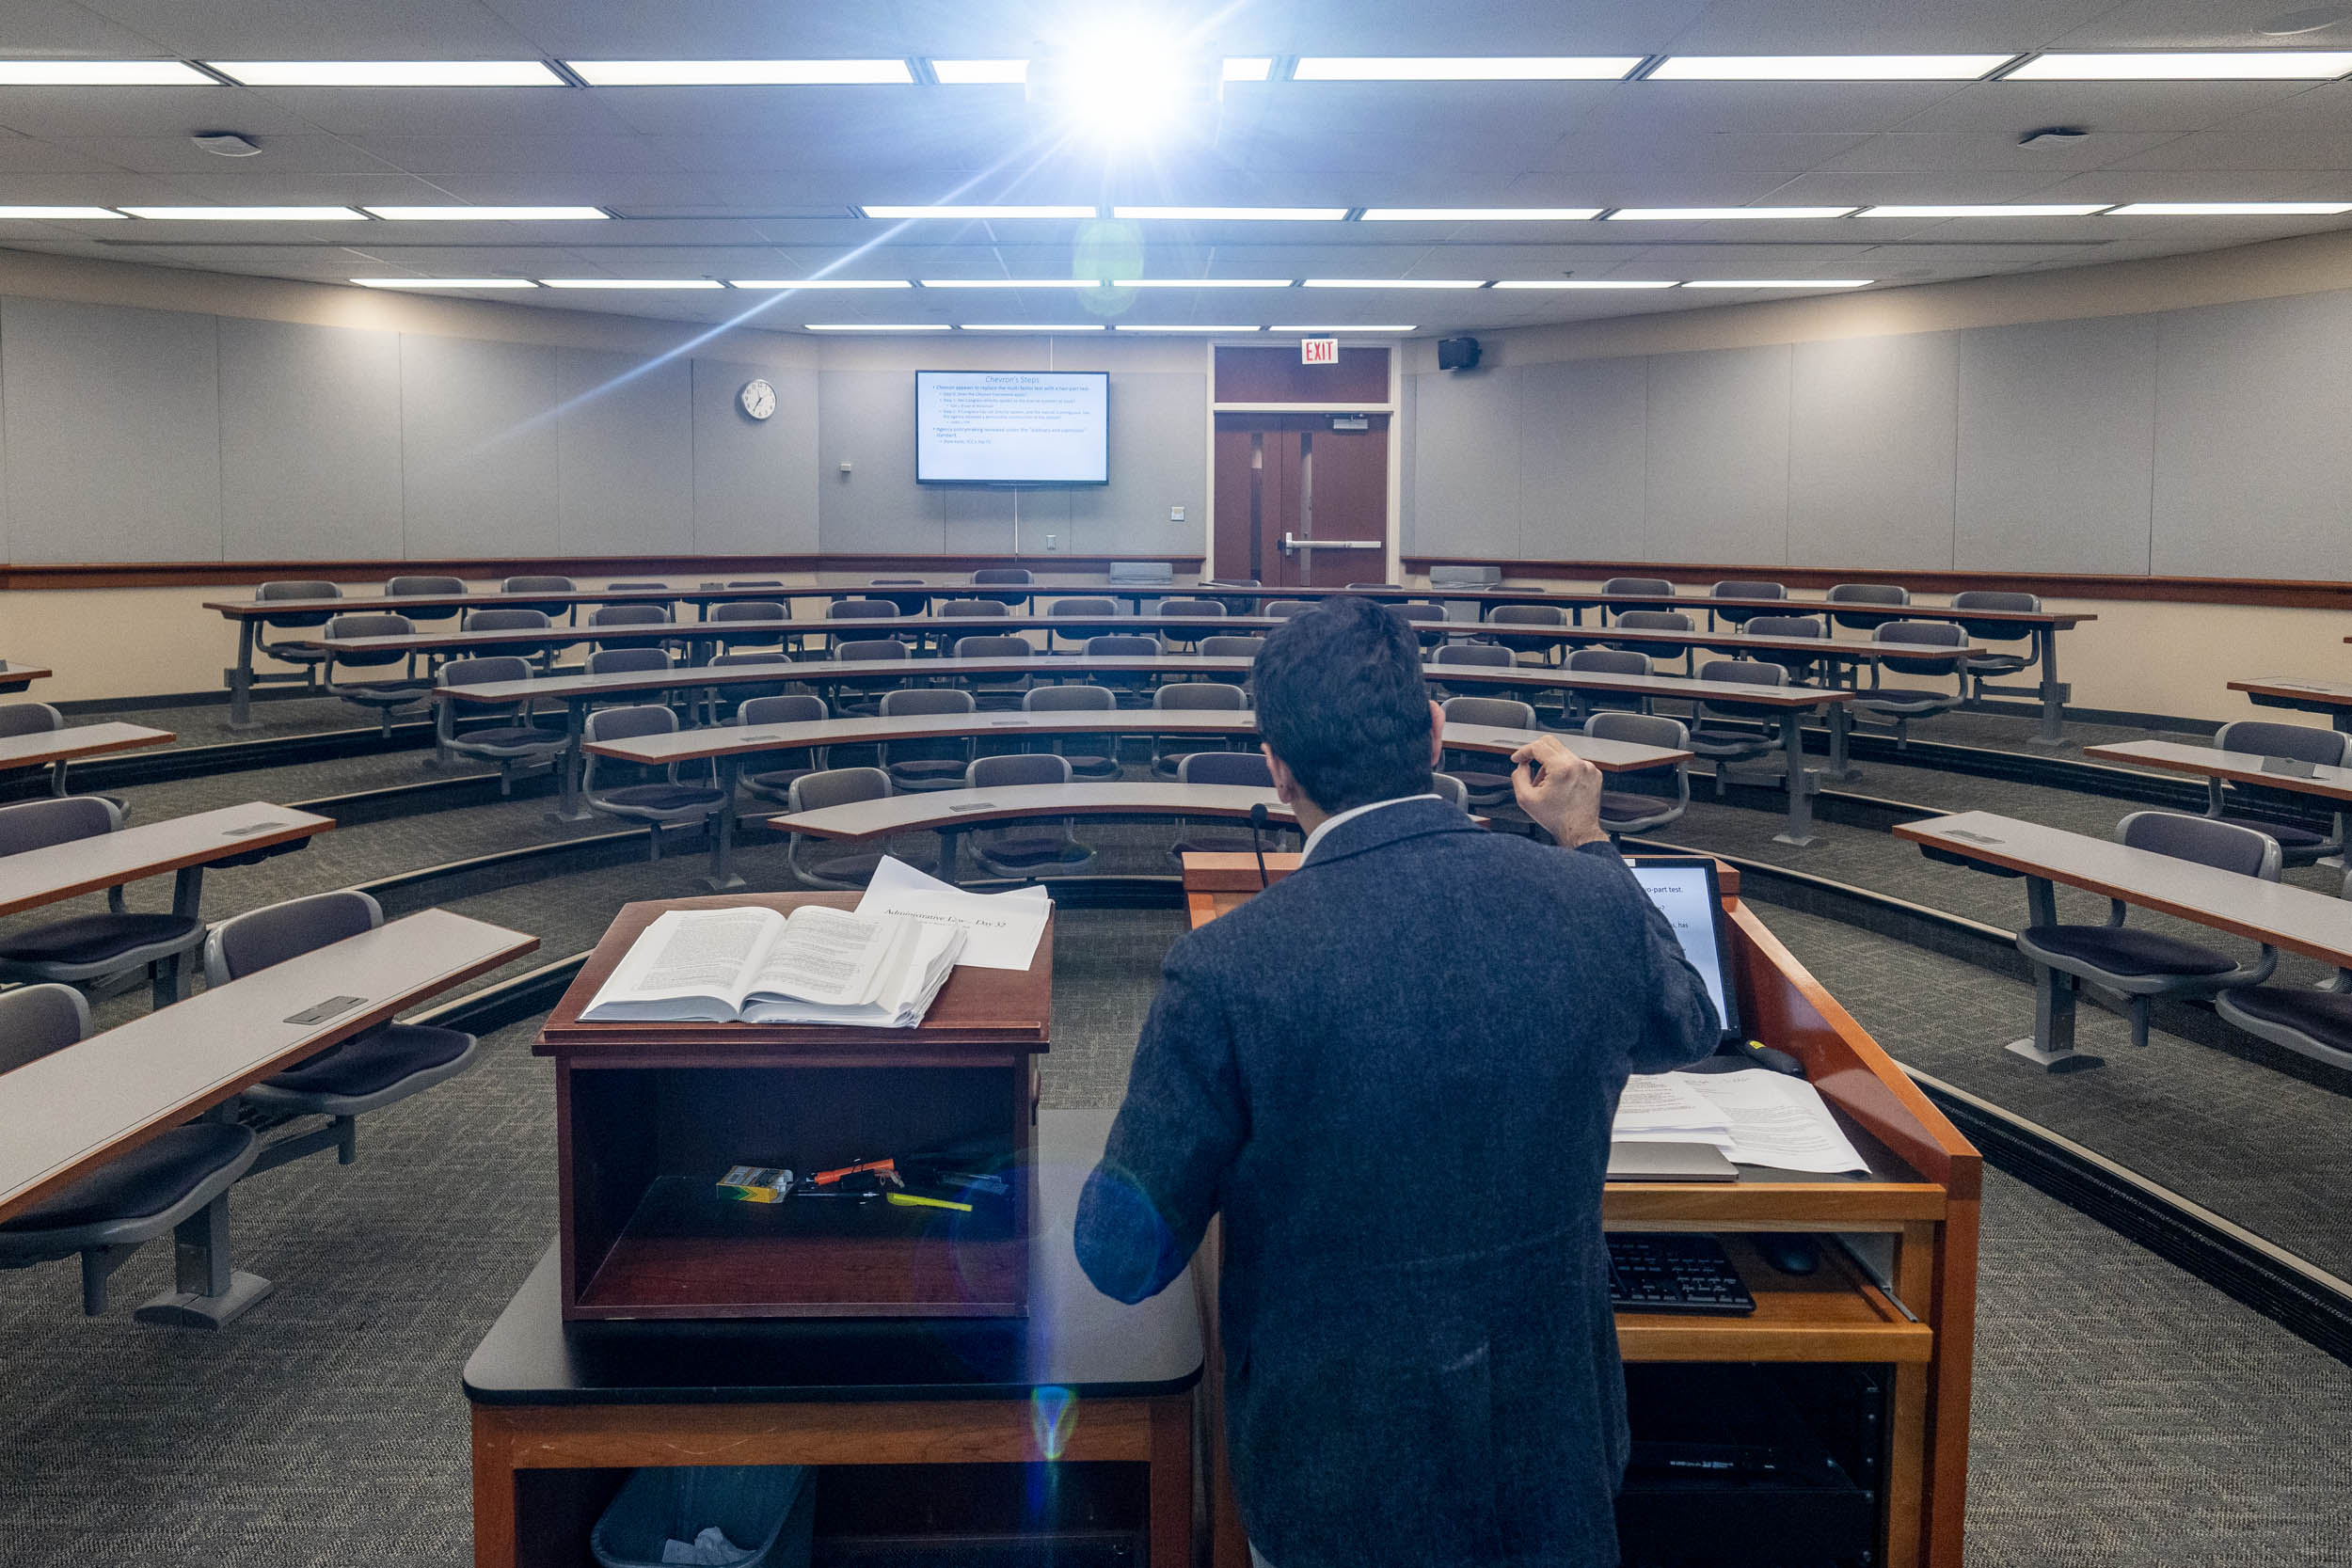 Professor standing at a podium with an empty classroom